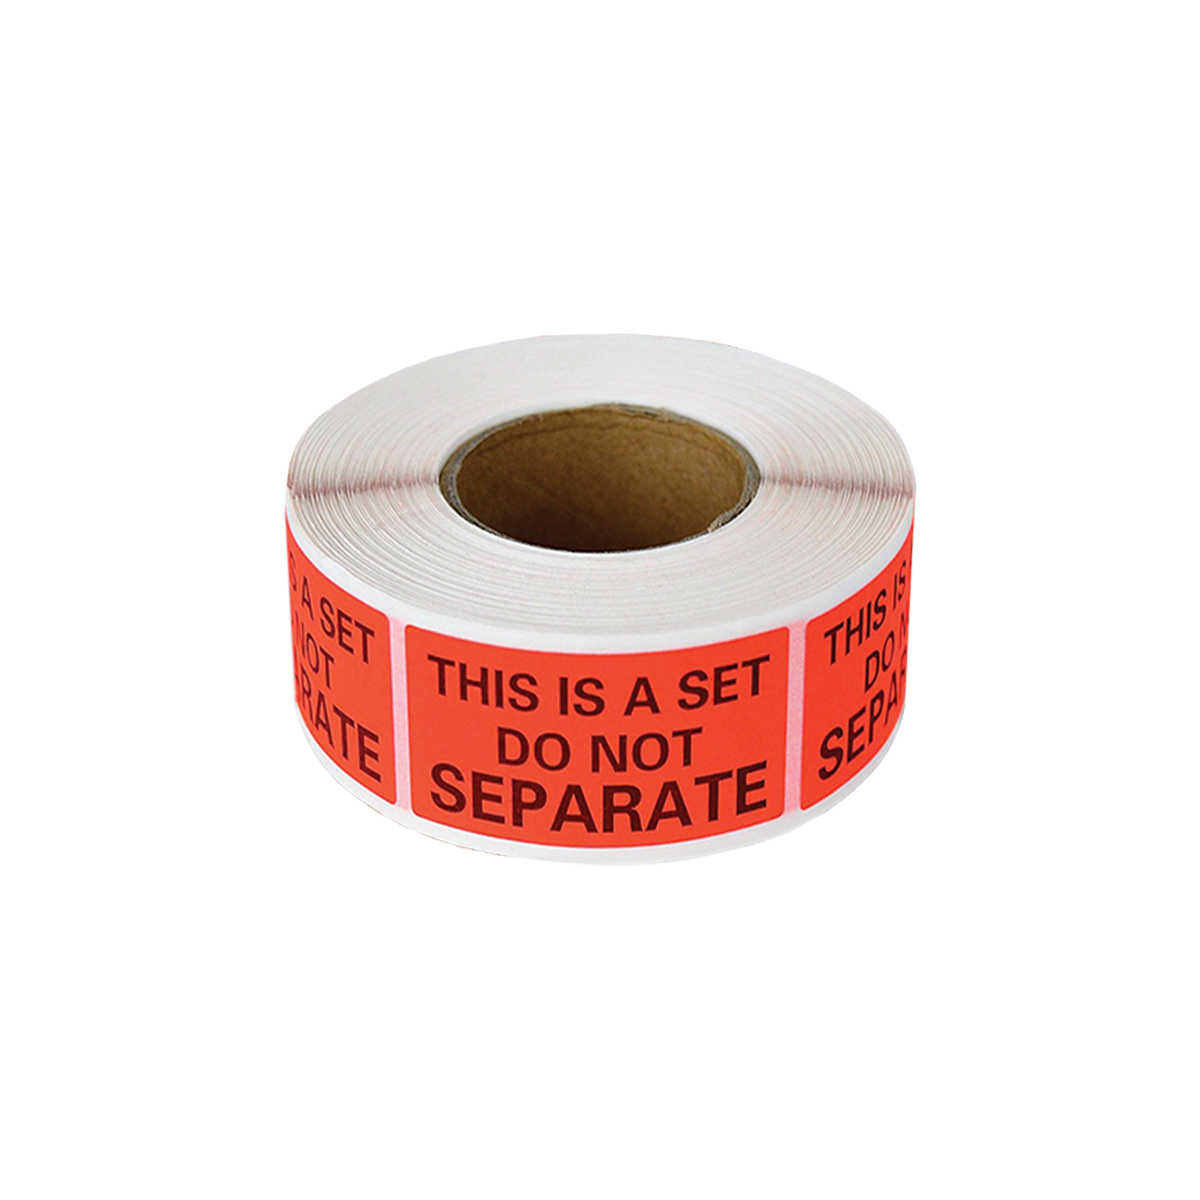 12 PACK 6000 Sold as a Set Do Not Separate Labels Stickers by Kenco 3 X 1 Fluorescent Green FBA Labels Shipping Labels